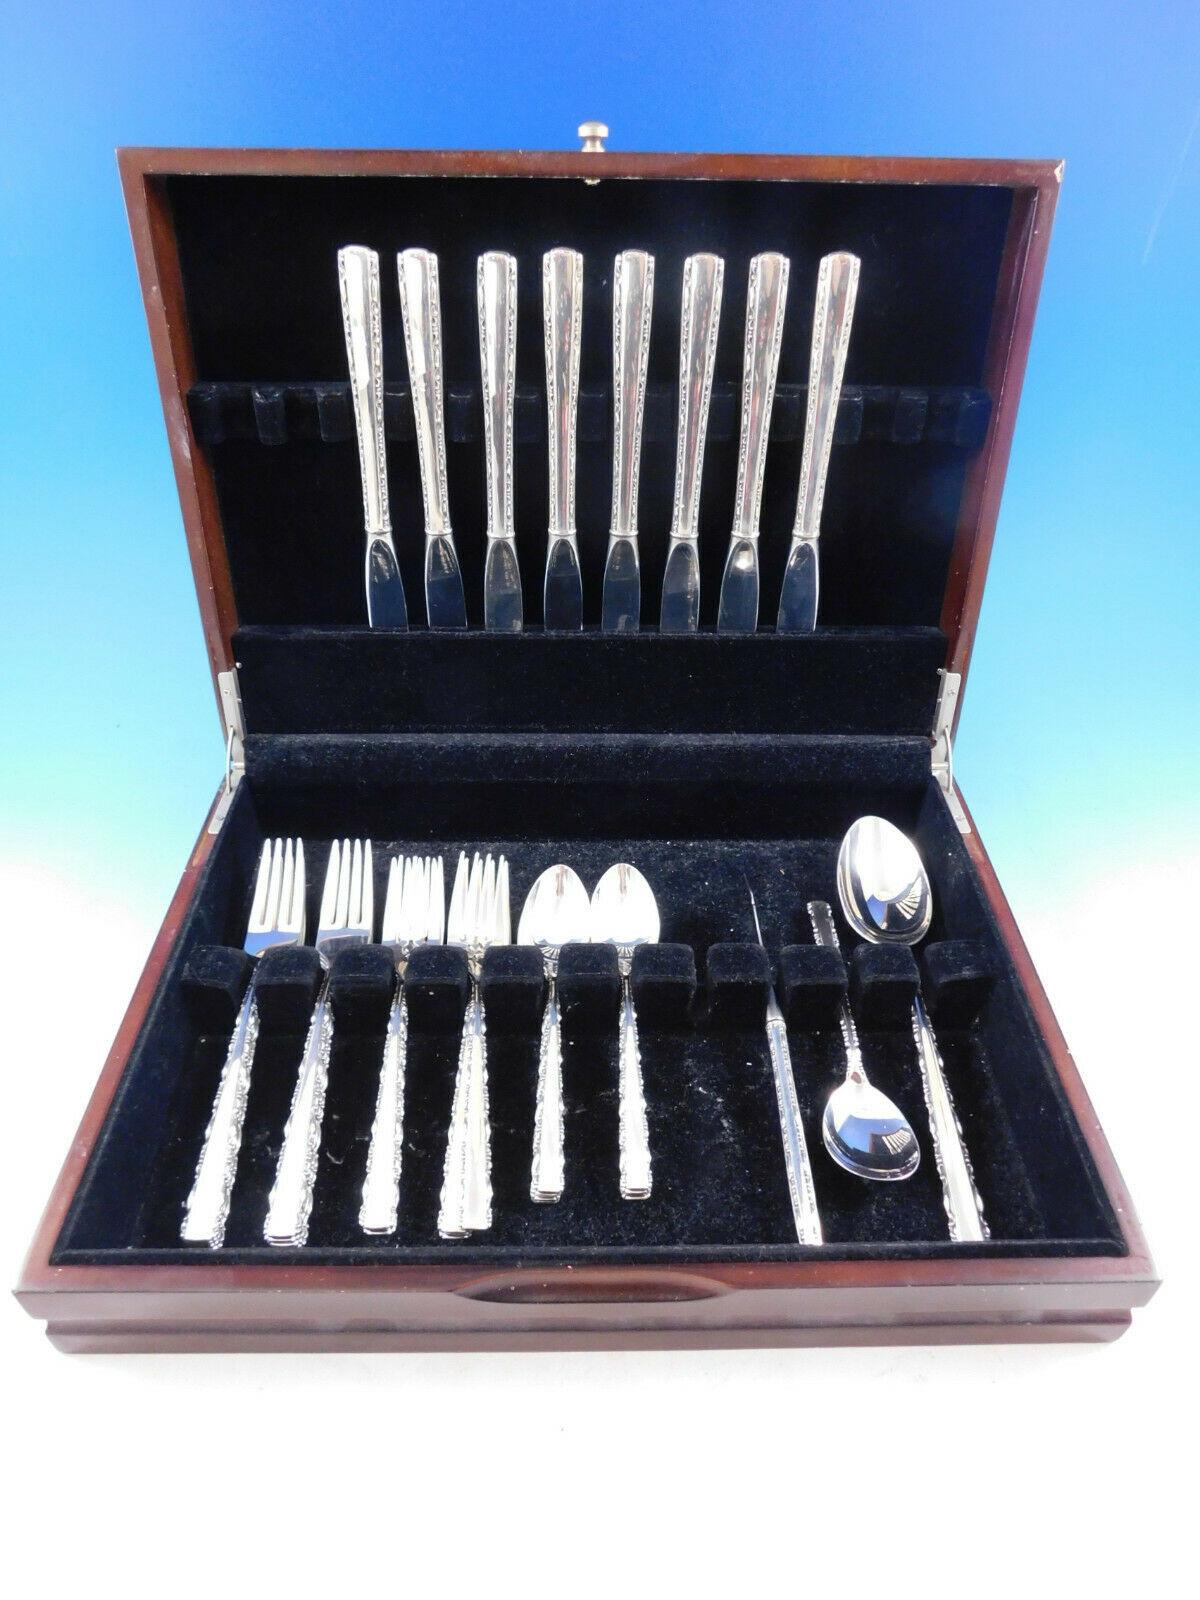 Scarce Avila by Alvin, circa 1969, sterling silver flatware set - 35 pieces. This set includes:

8 knives, 9